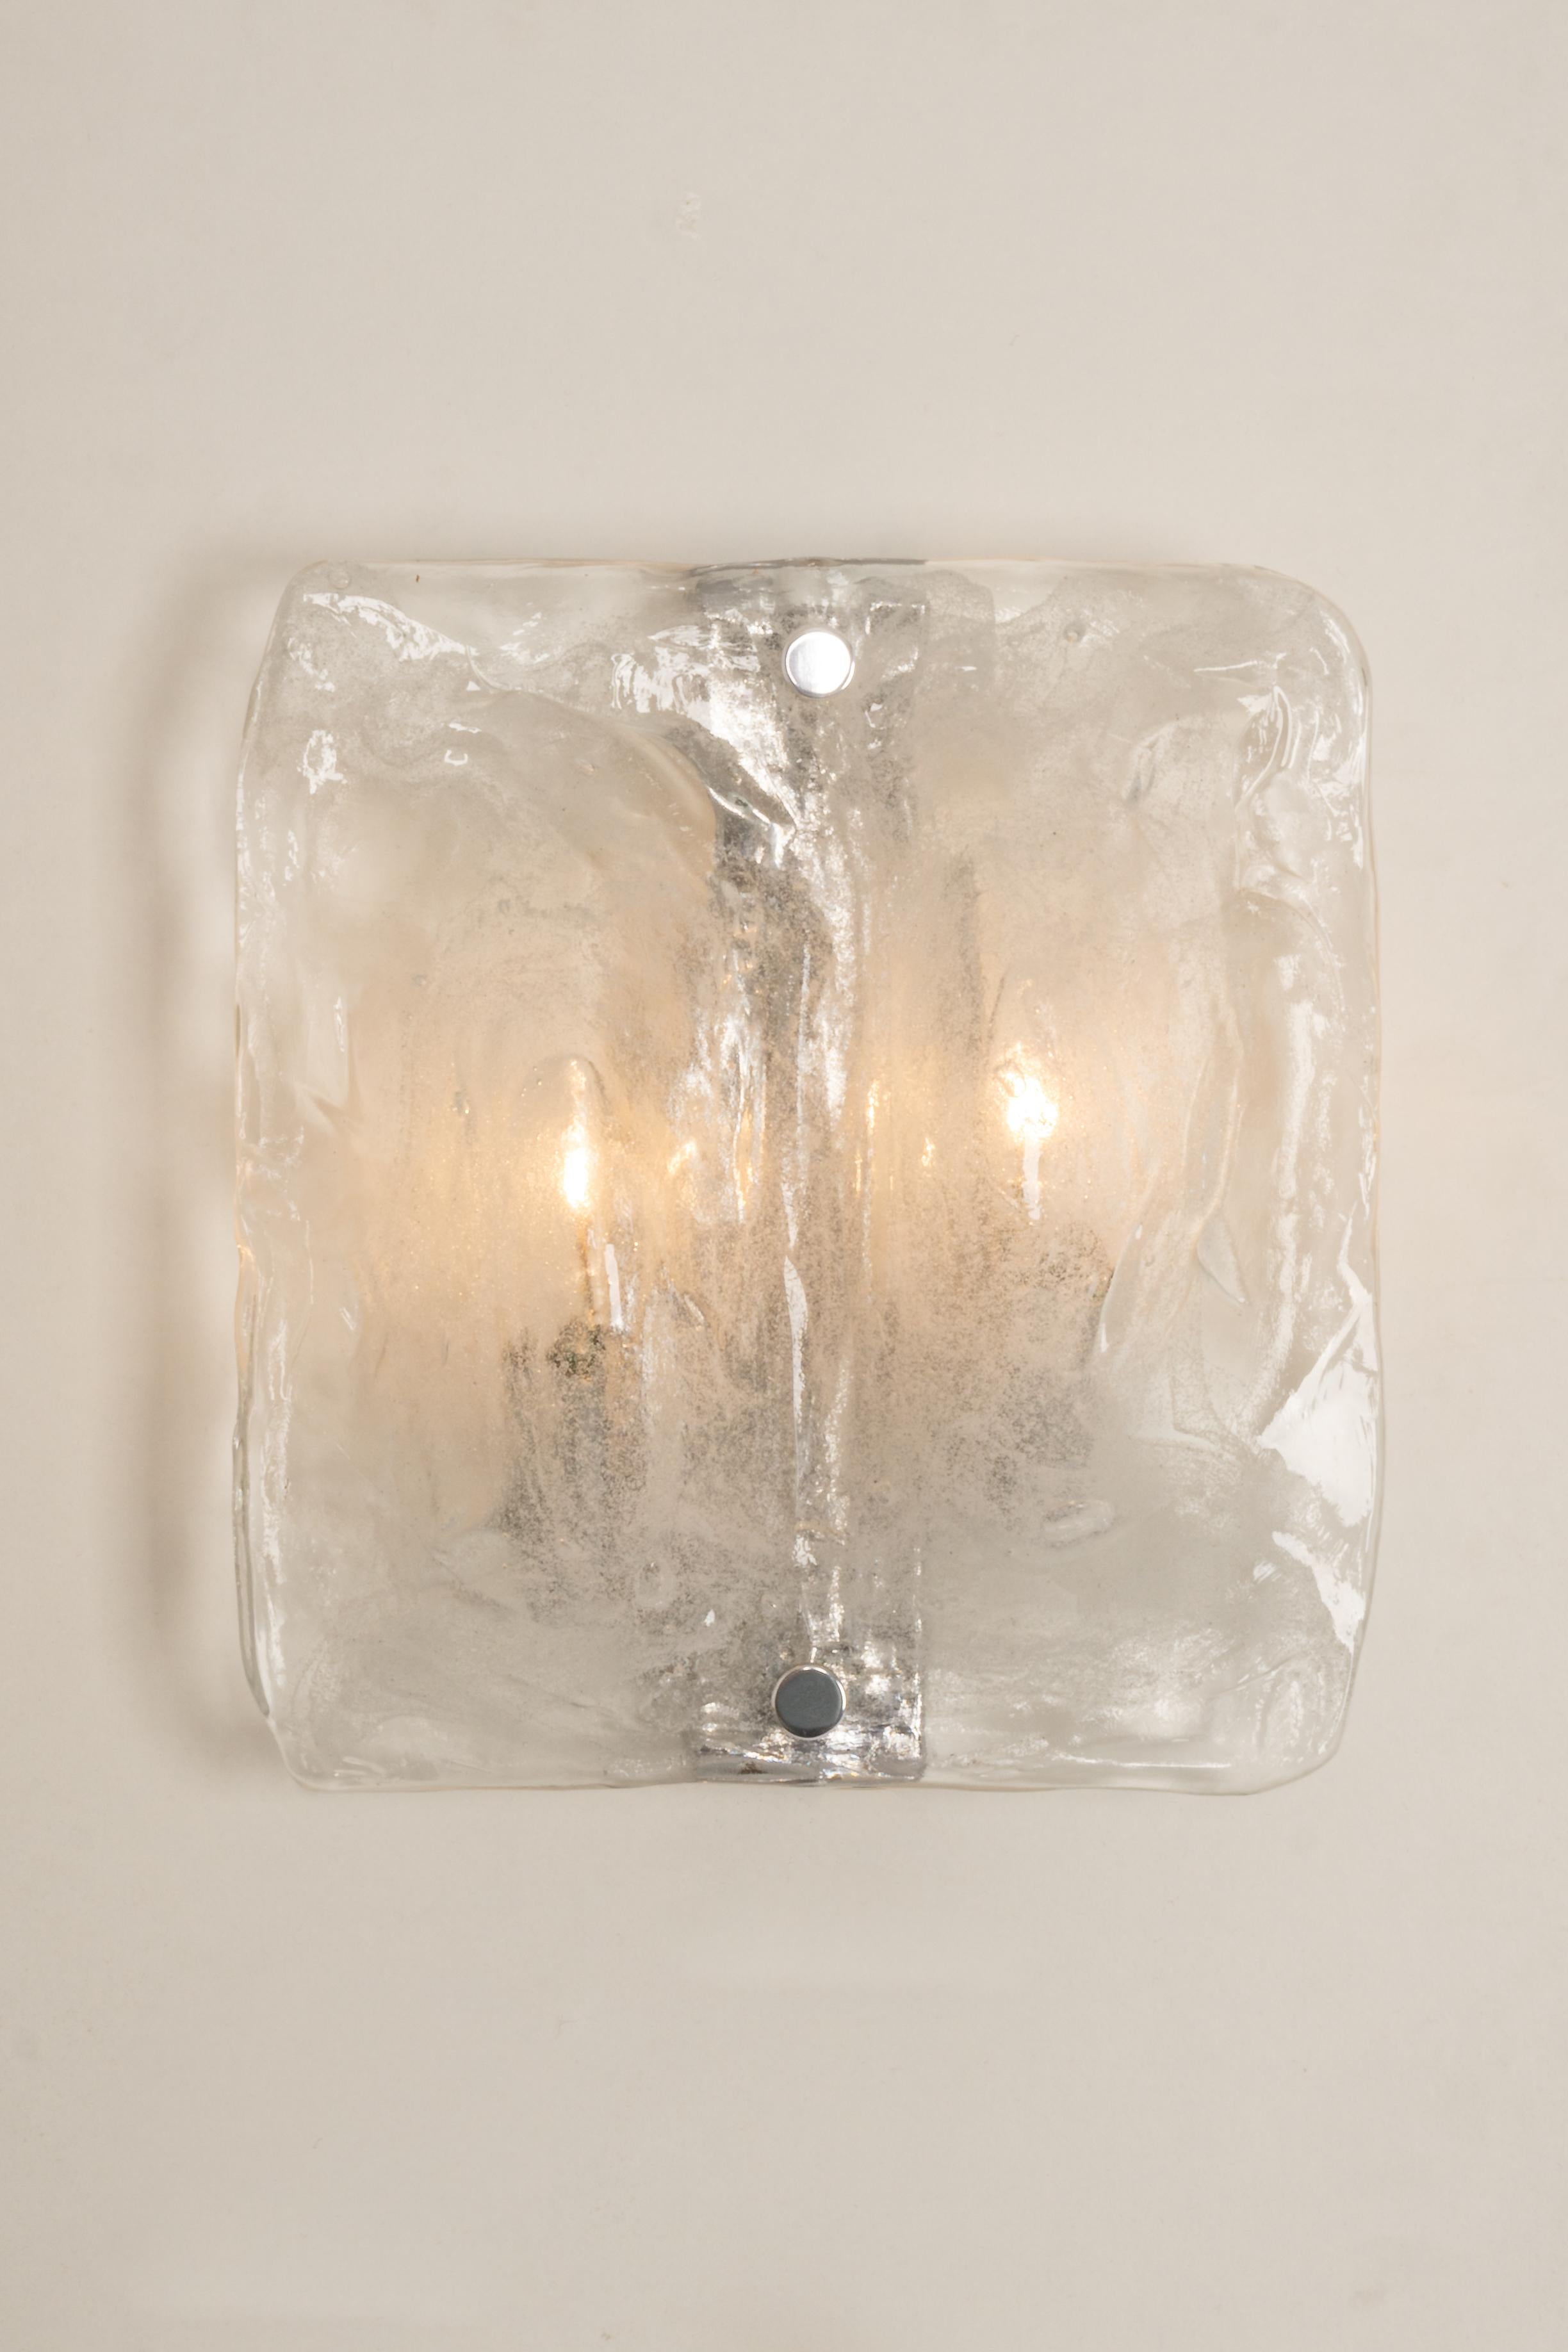 Wonderful pair of midcentury wall sconces with one large Murano glass piece in each lamp, made by Kalmar, Austria, manufactured, circa 1960-1969.
Chrome metal base.
High quality and in very good condition. Cleaned, well-wired, and ready to